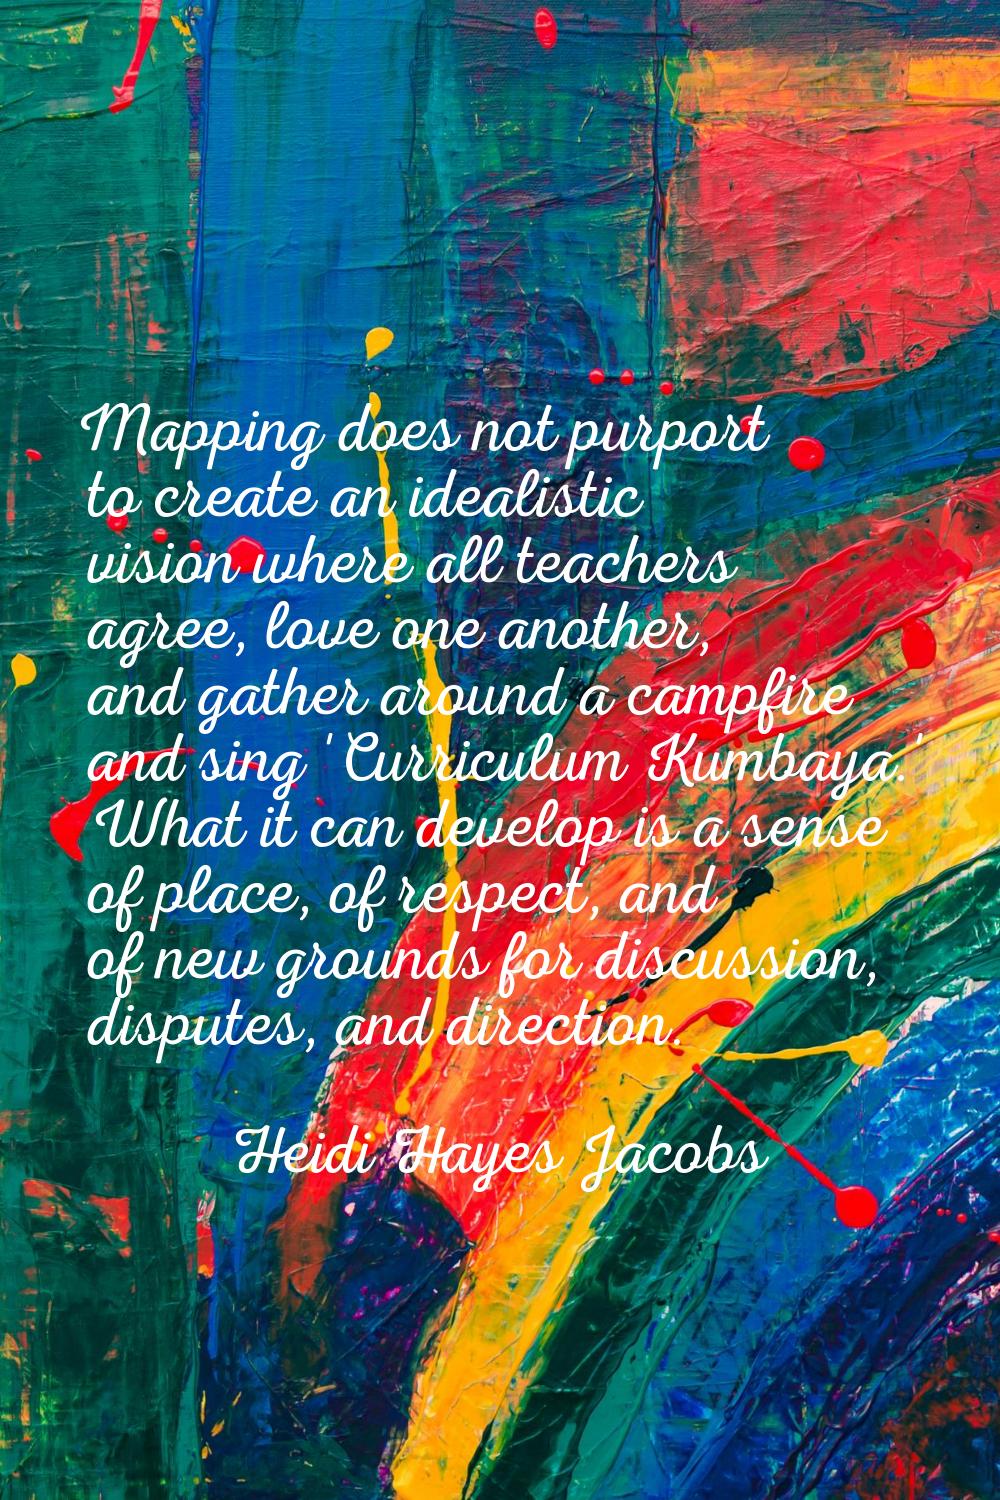 Mapping does not purport to create an idealistic vision where all teachers agree, love one another,